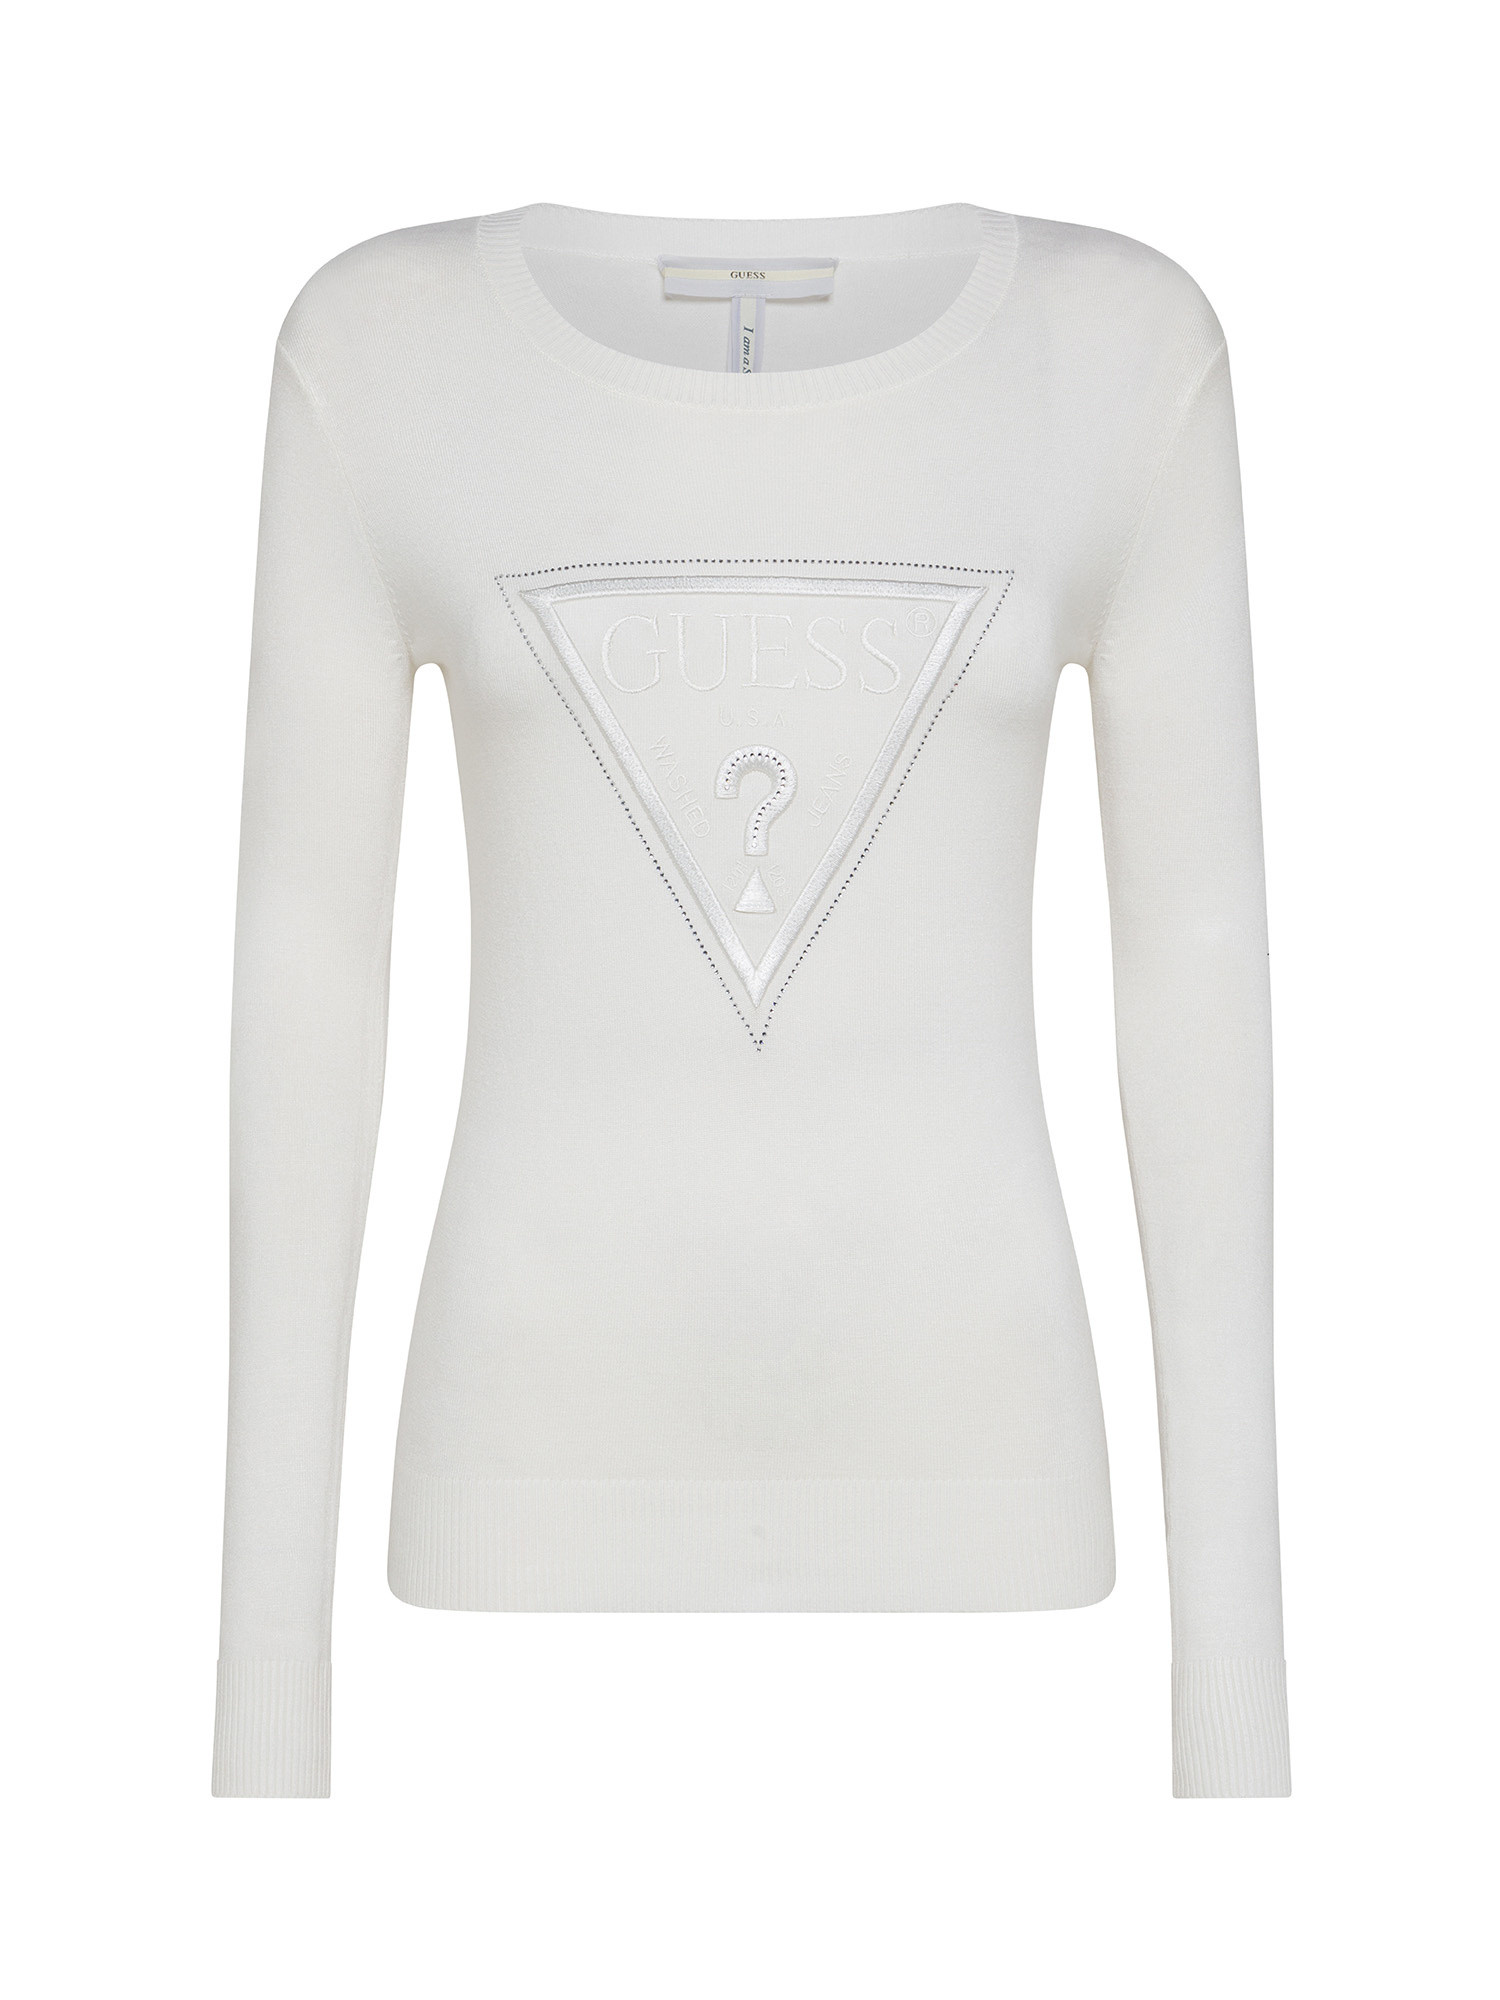 Guess - Slim fit logo sweater with rhinestones, Cream, large image number 0